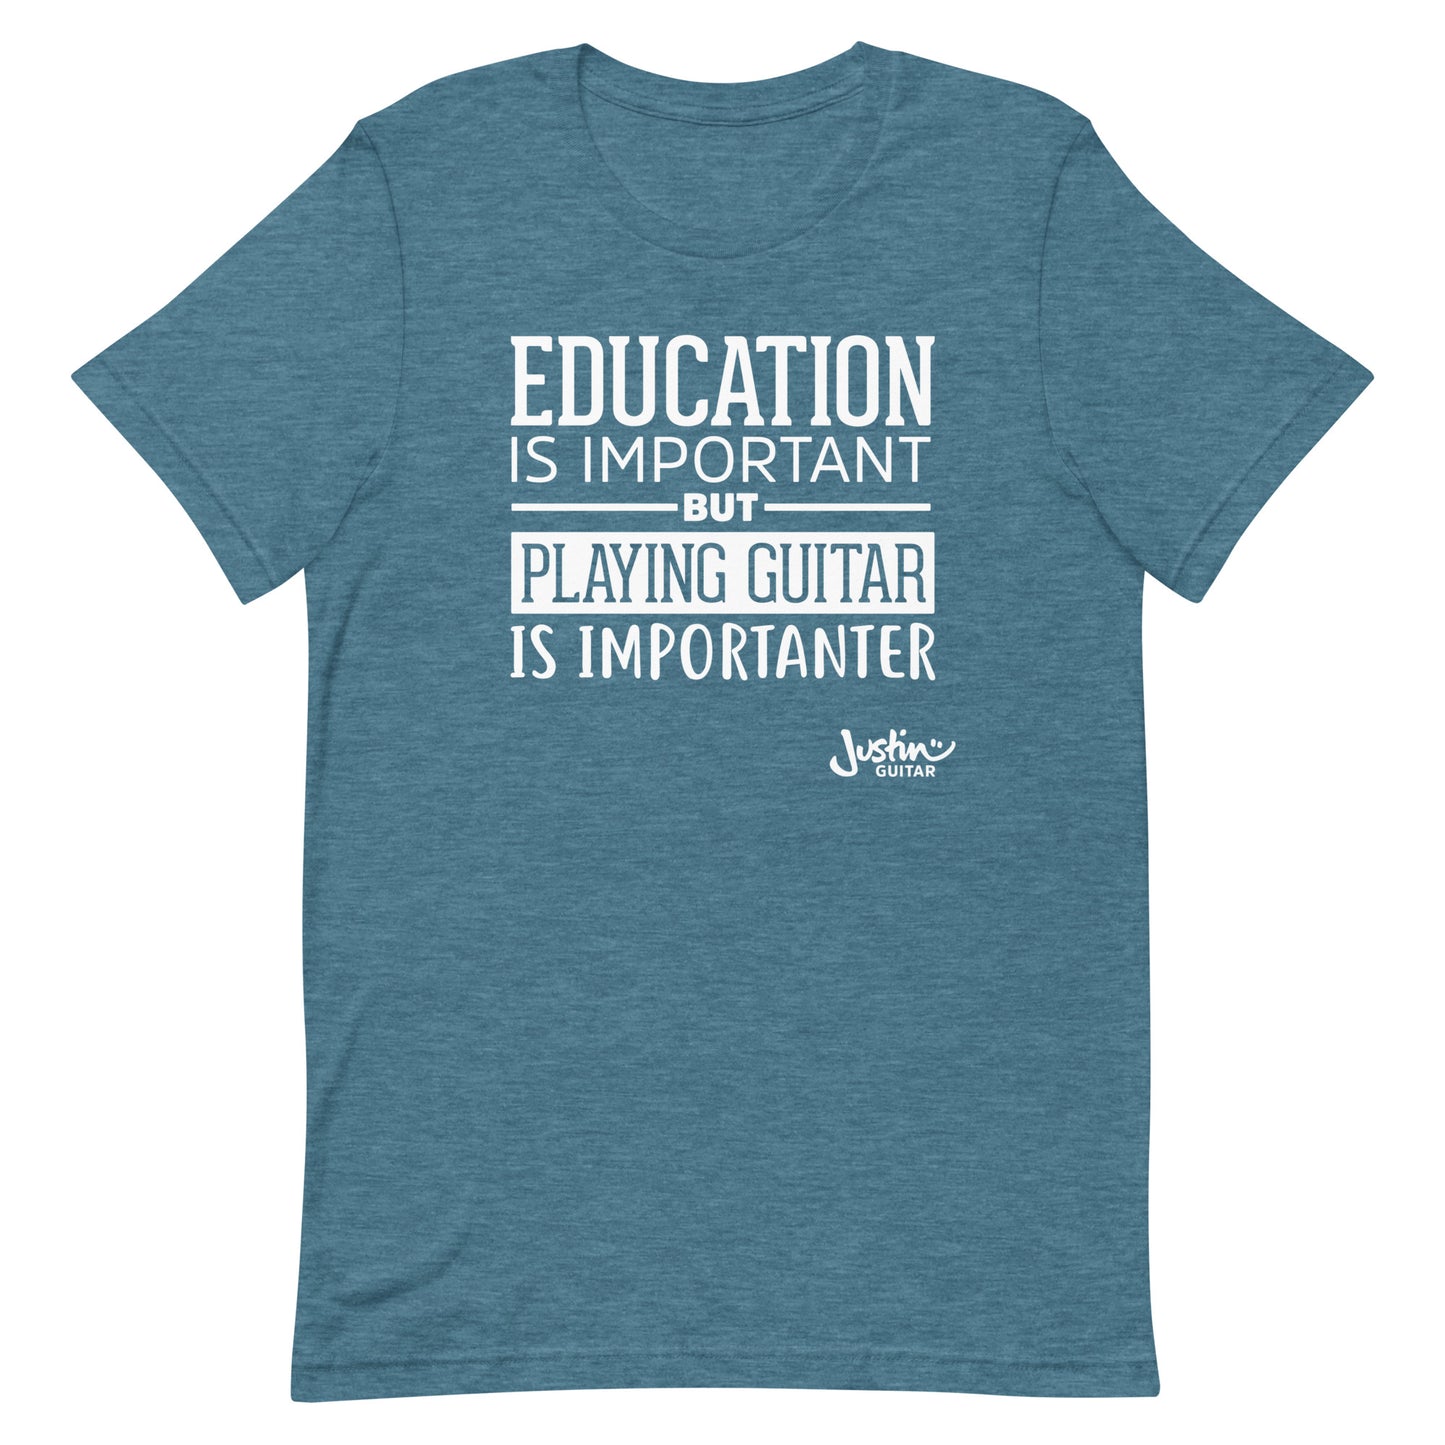 Teal tshirt that says 'Education is important, but playing guitar is importanter'